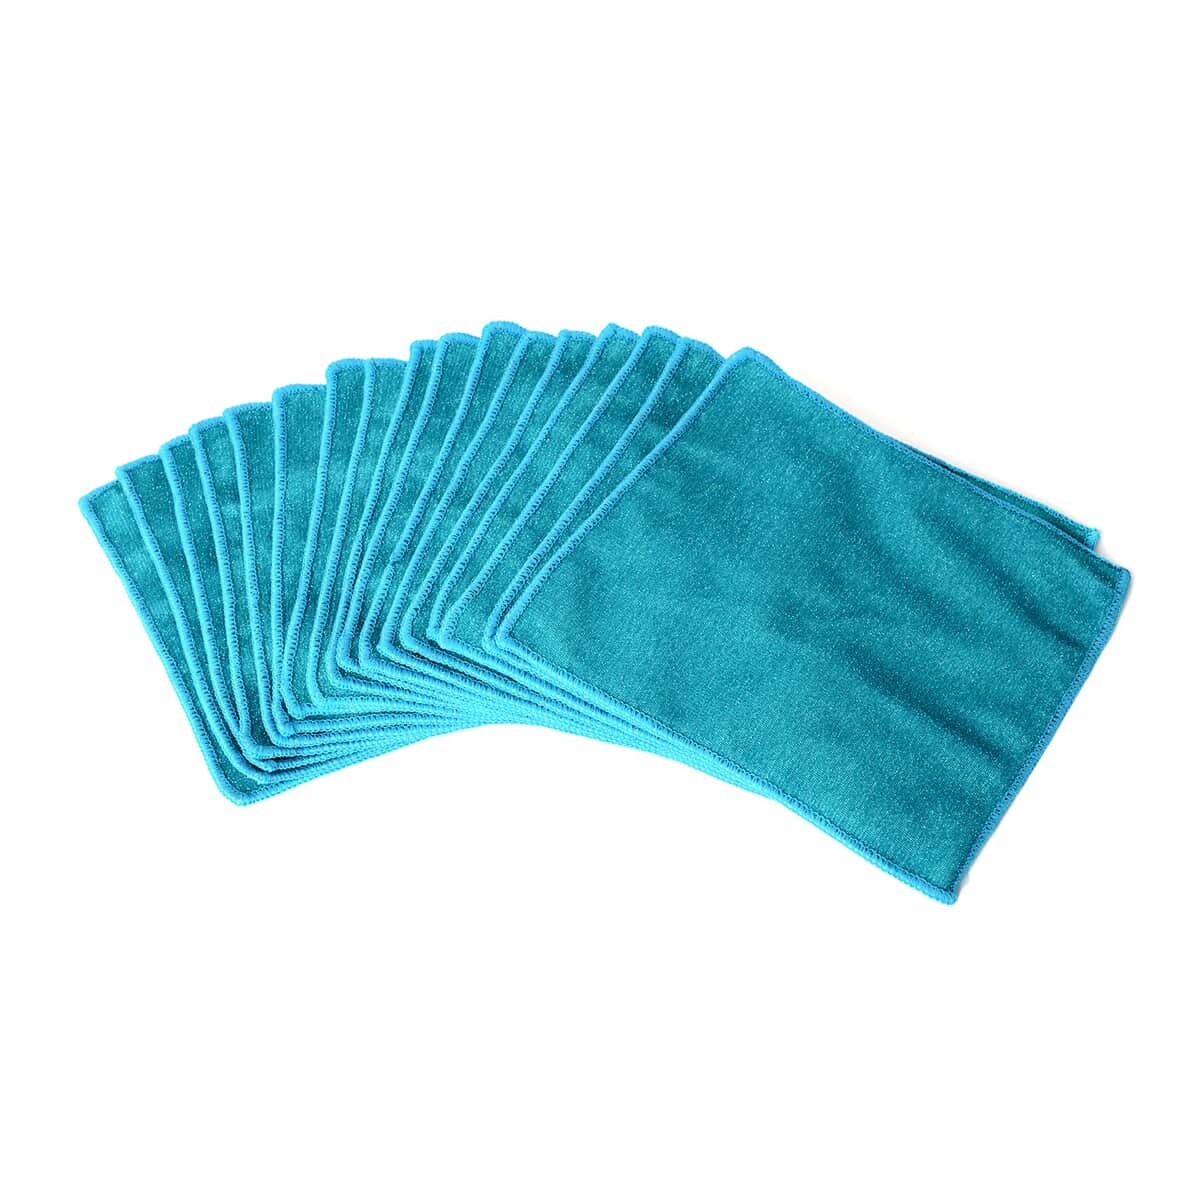 Homesmart Set of 20 Turquoise Double Sided Microfiber and Scratch Fiber Dish Cloth image number 4